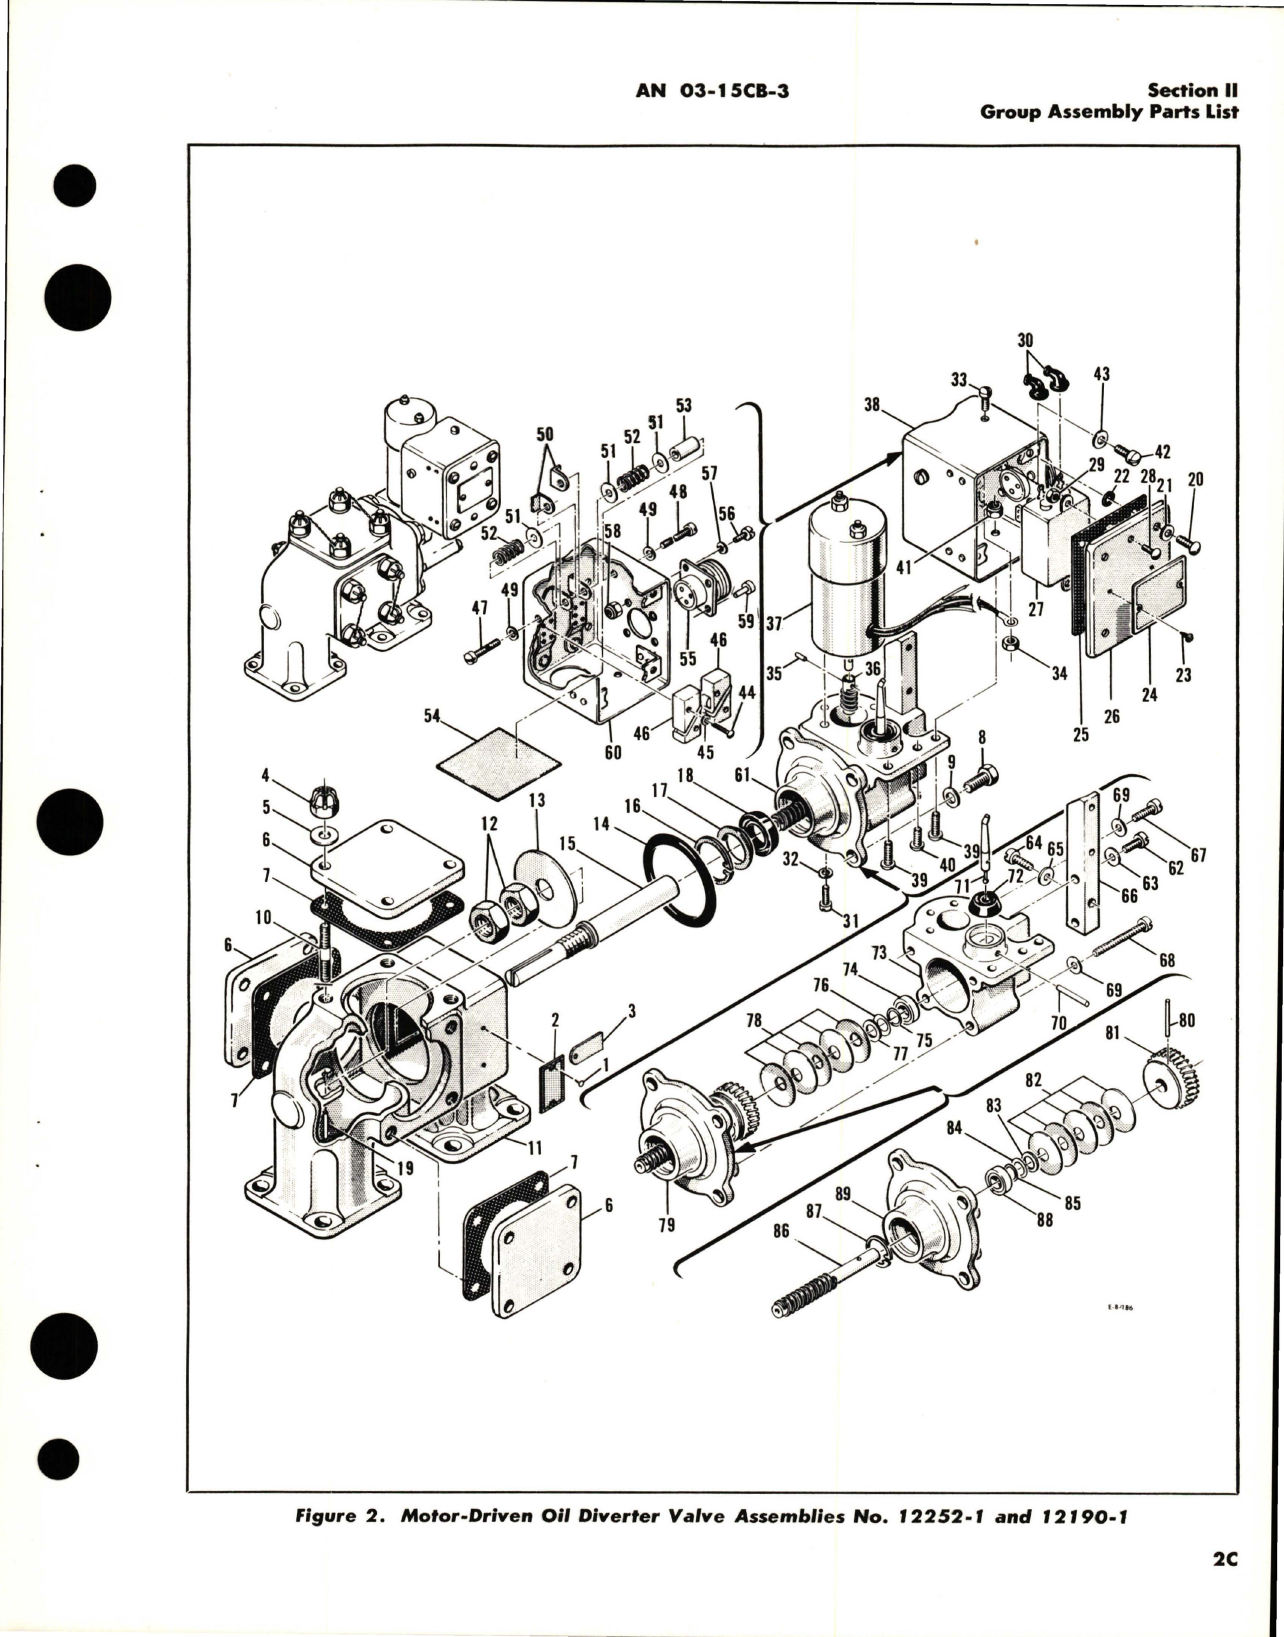 Sample page 9 from AirCorps Library document: Illustrated Parts Breakdown for Oil Diverter Valves